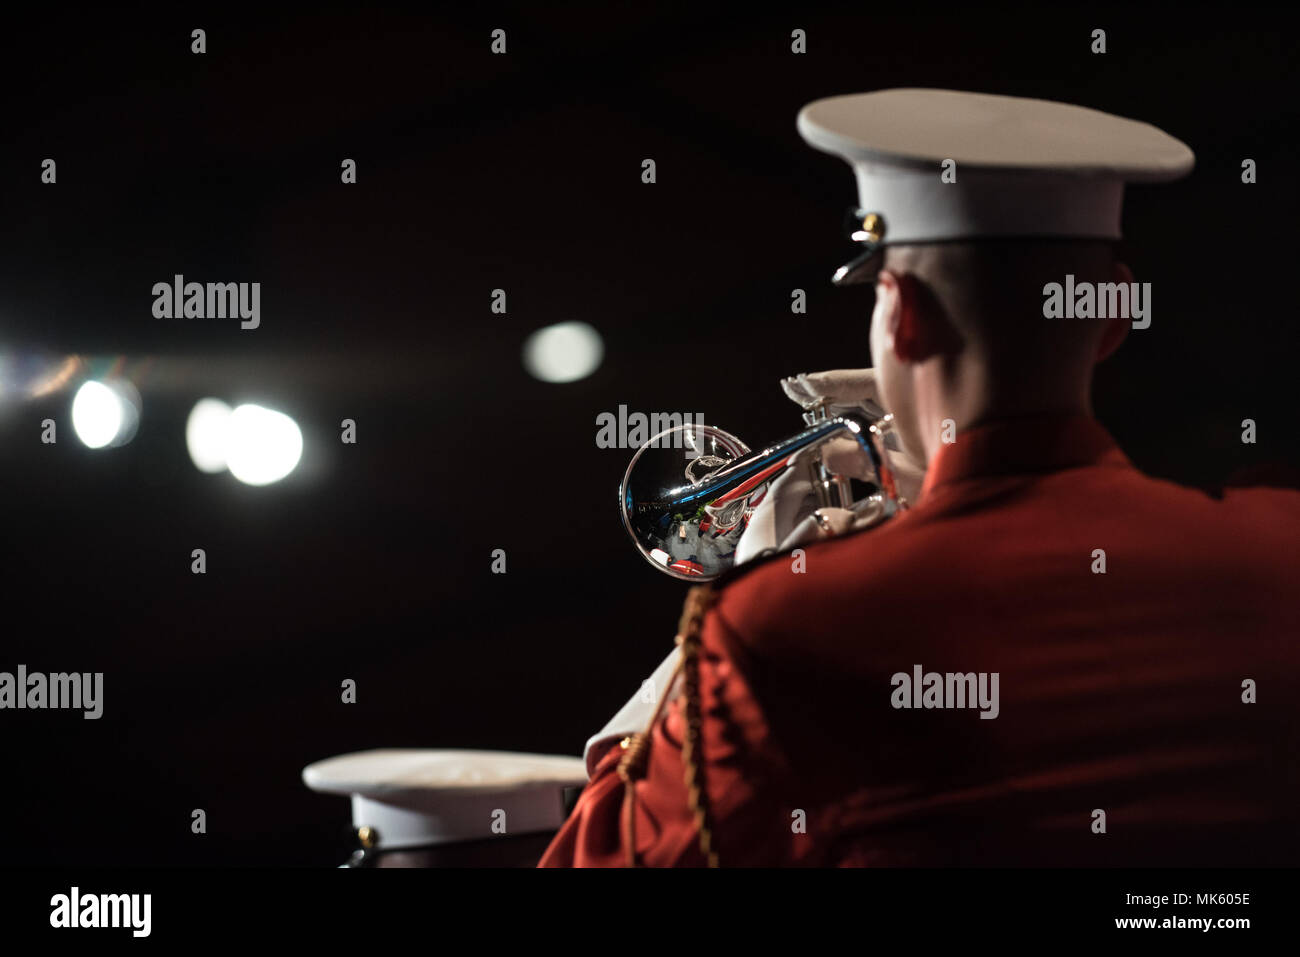 "The Commandant's Own" United States Marine Drum and Bugle Corps plays during the Semper Fidelis Society Boston U.S. Marine Corps Birthday Luncheon at the Boston Convention & Exhibition Center, Massachusetts, Nov. 13, 2017. (DoD Photo by U.S. Army Sgt. James K. McCann) Stock Photo